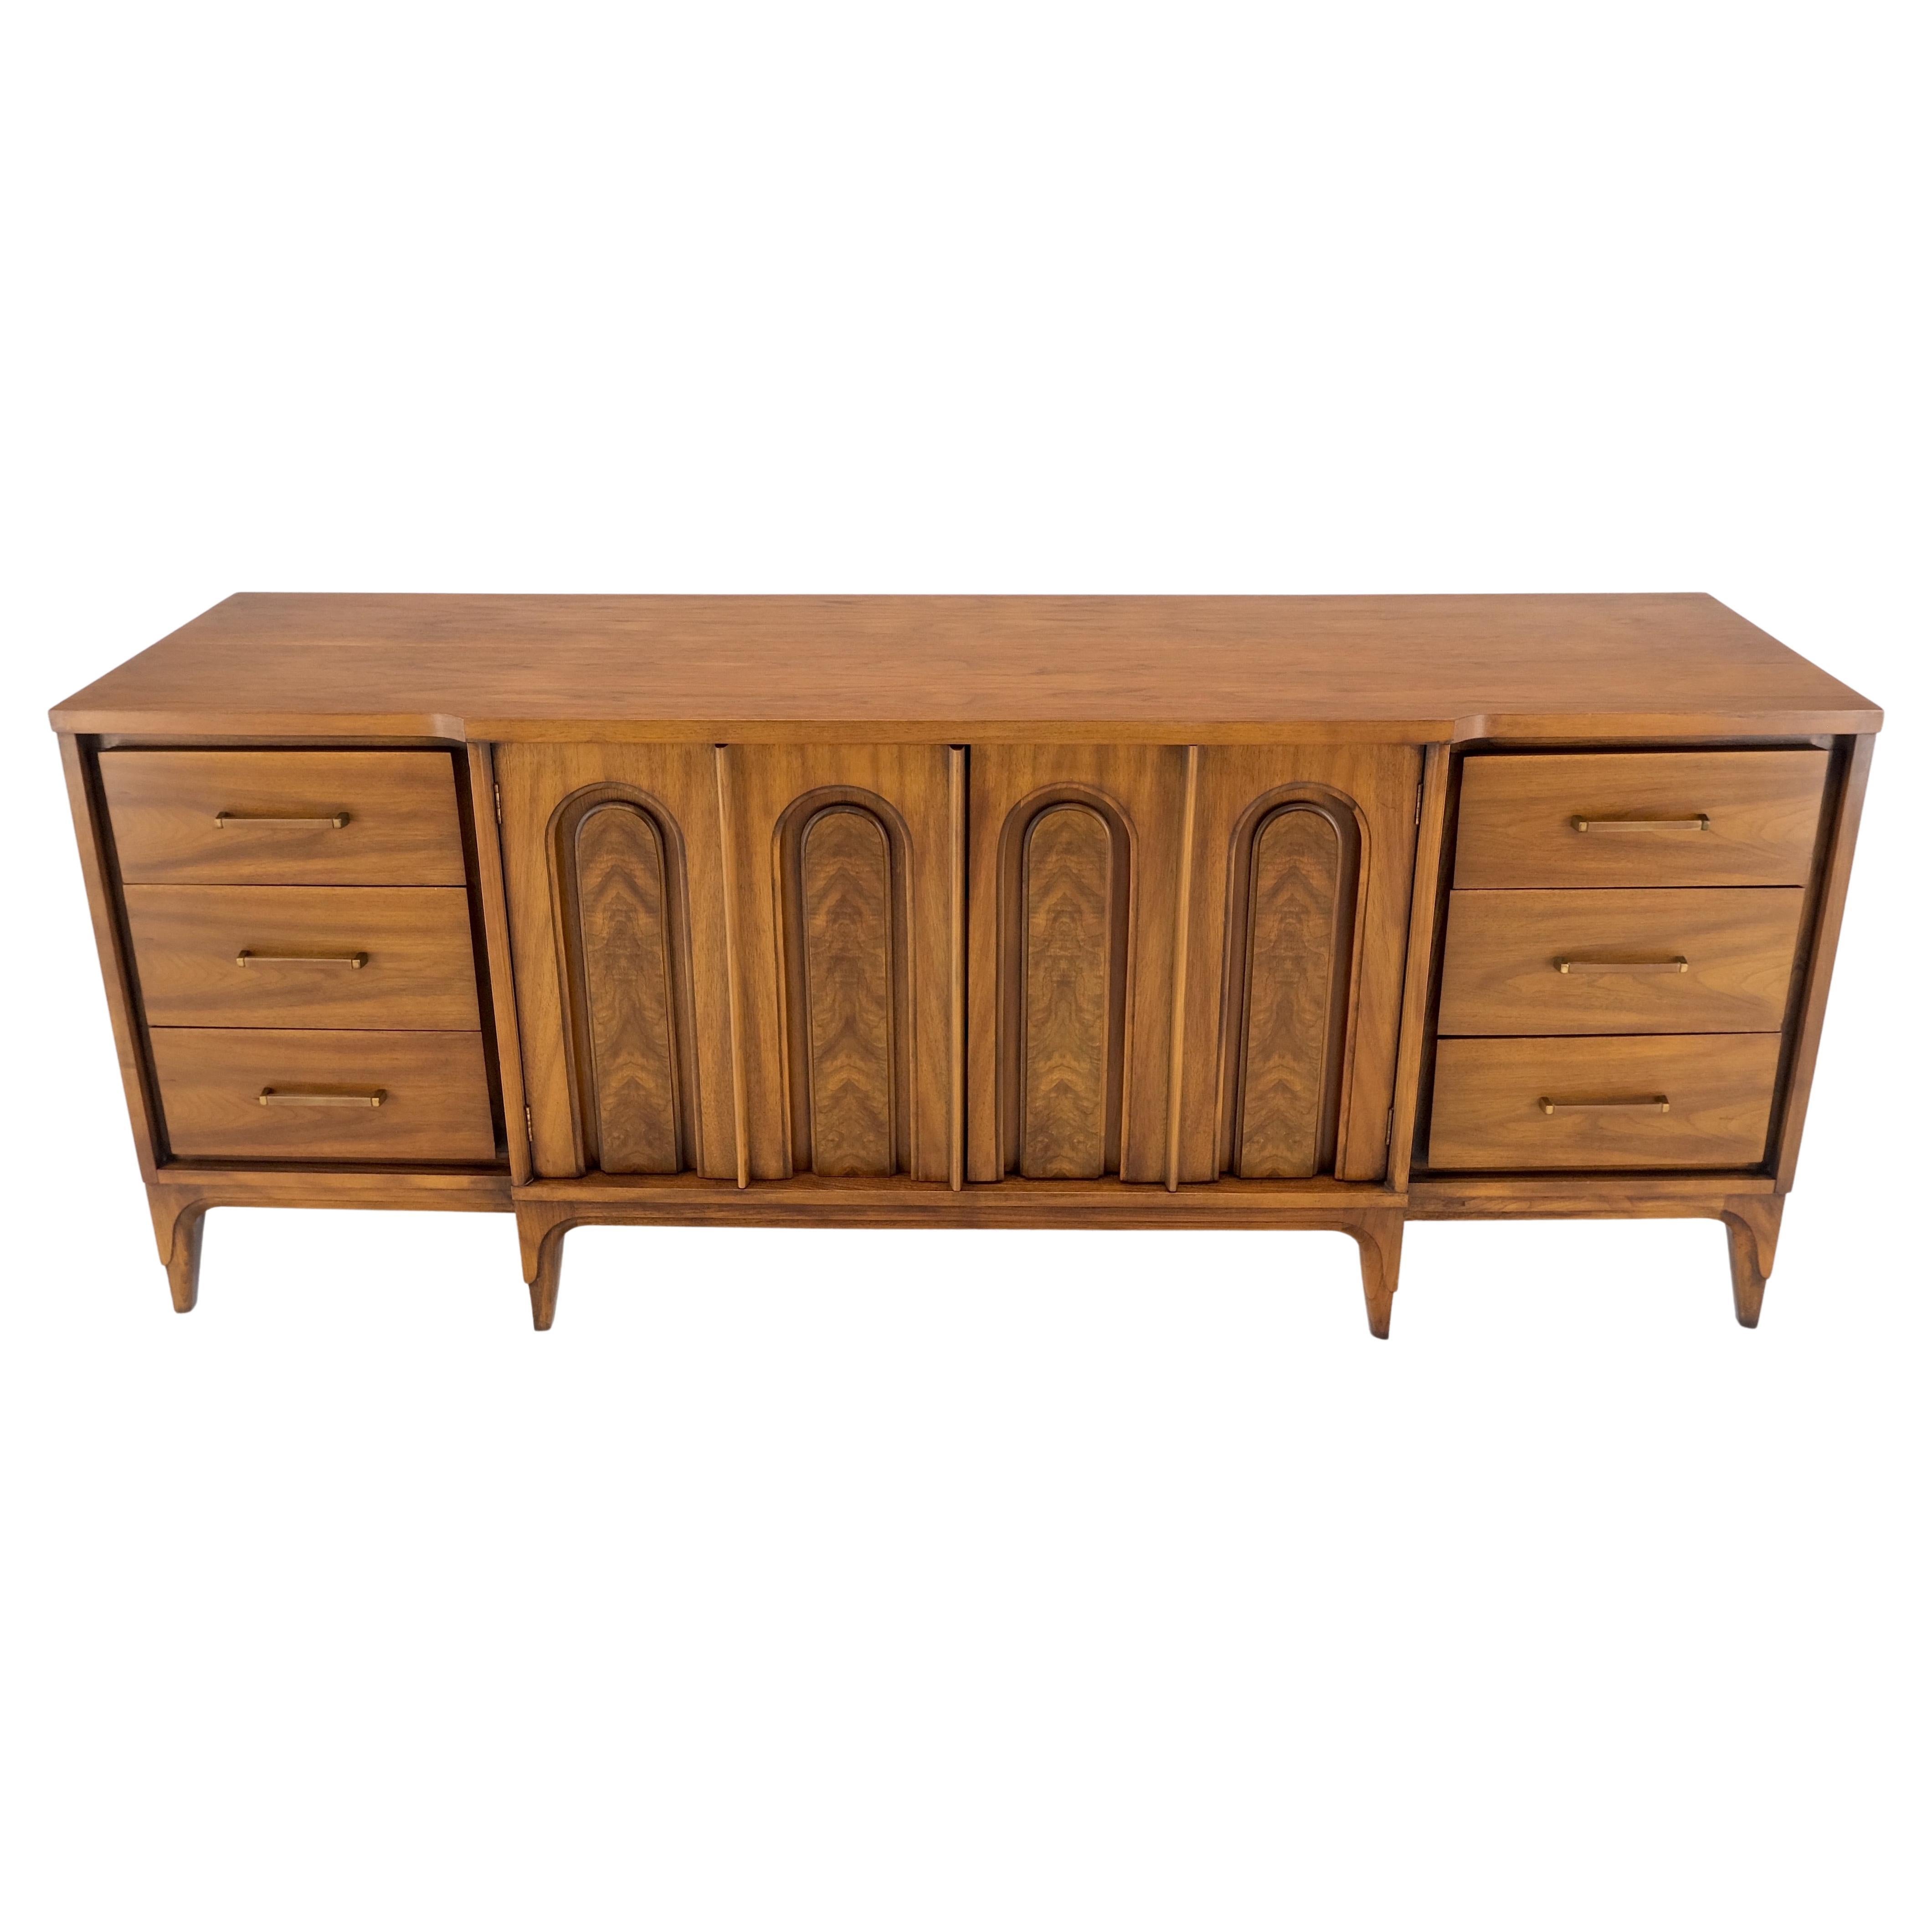 American Walnut Mid-Century Modern double doors 9 drawers dresser credenza MINT!
C. 1970s cabinet in rare super clean condition.